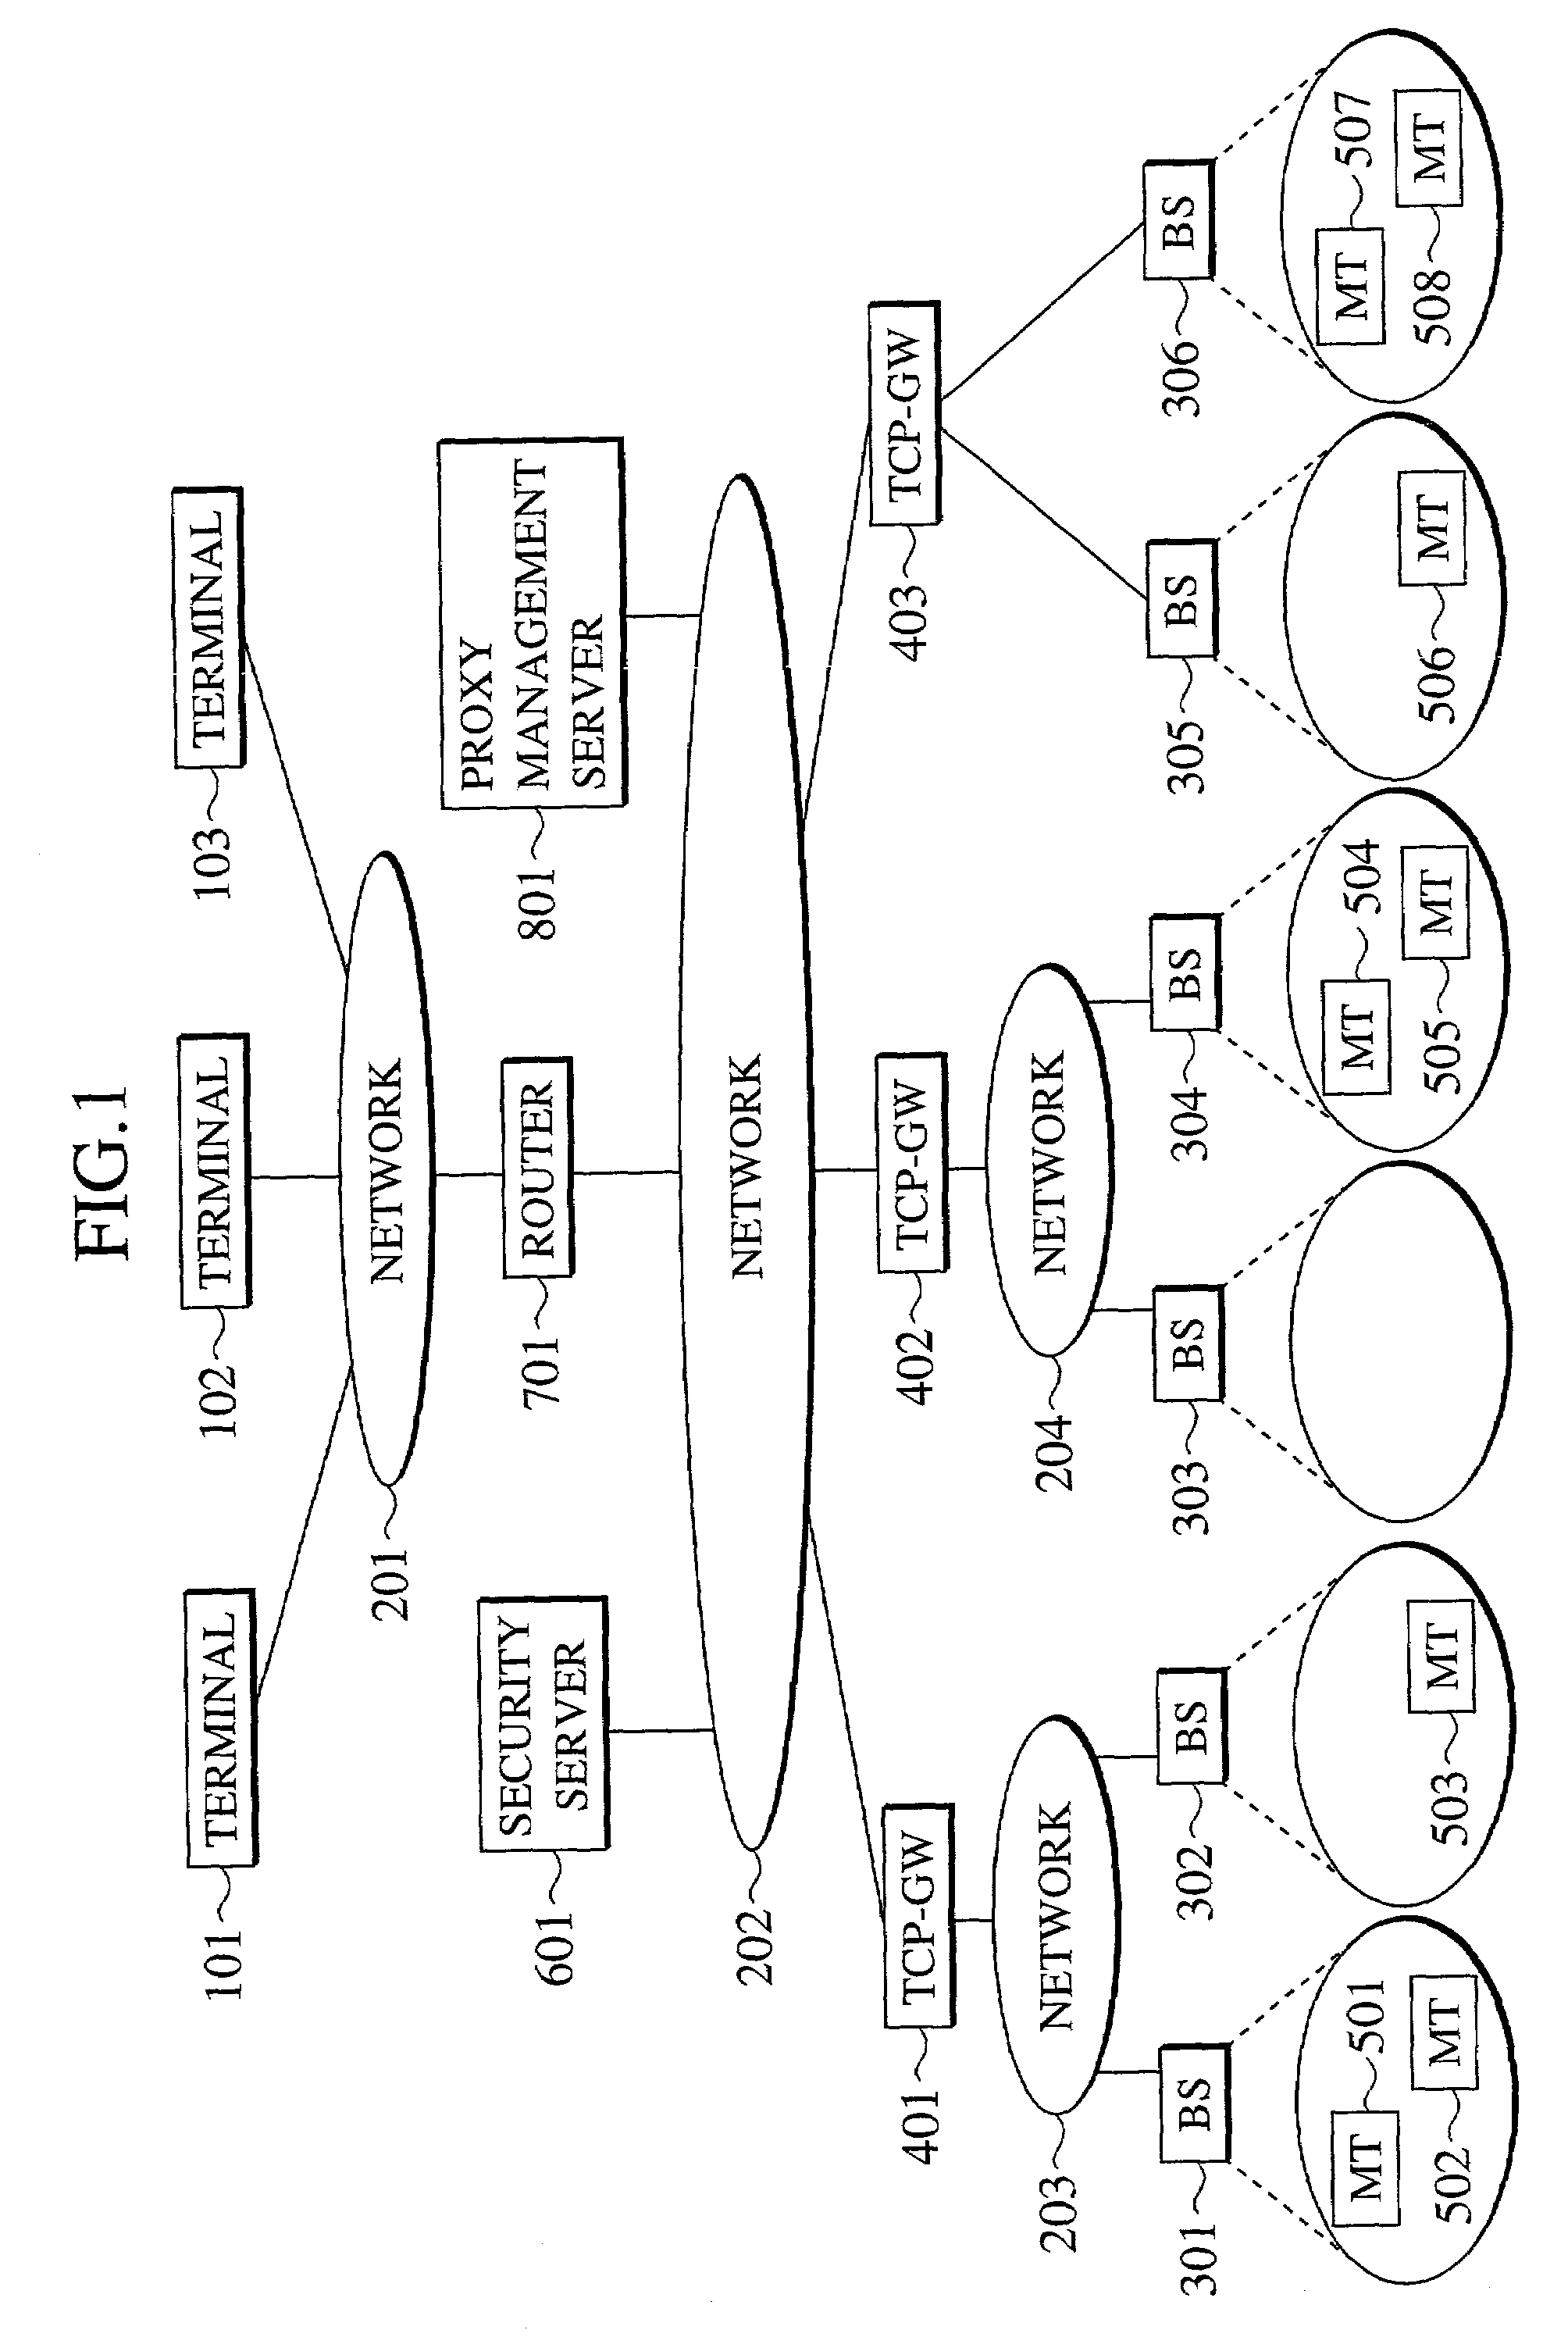 Communication control scheme using proxy device and security protocol in combination